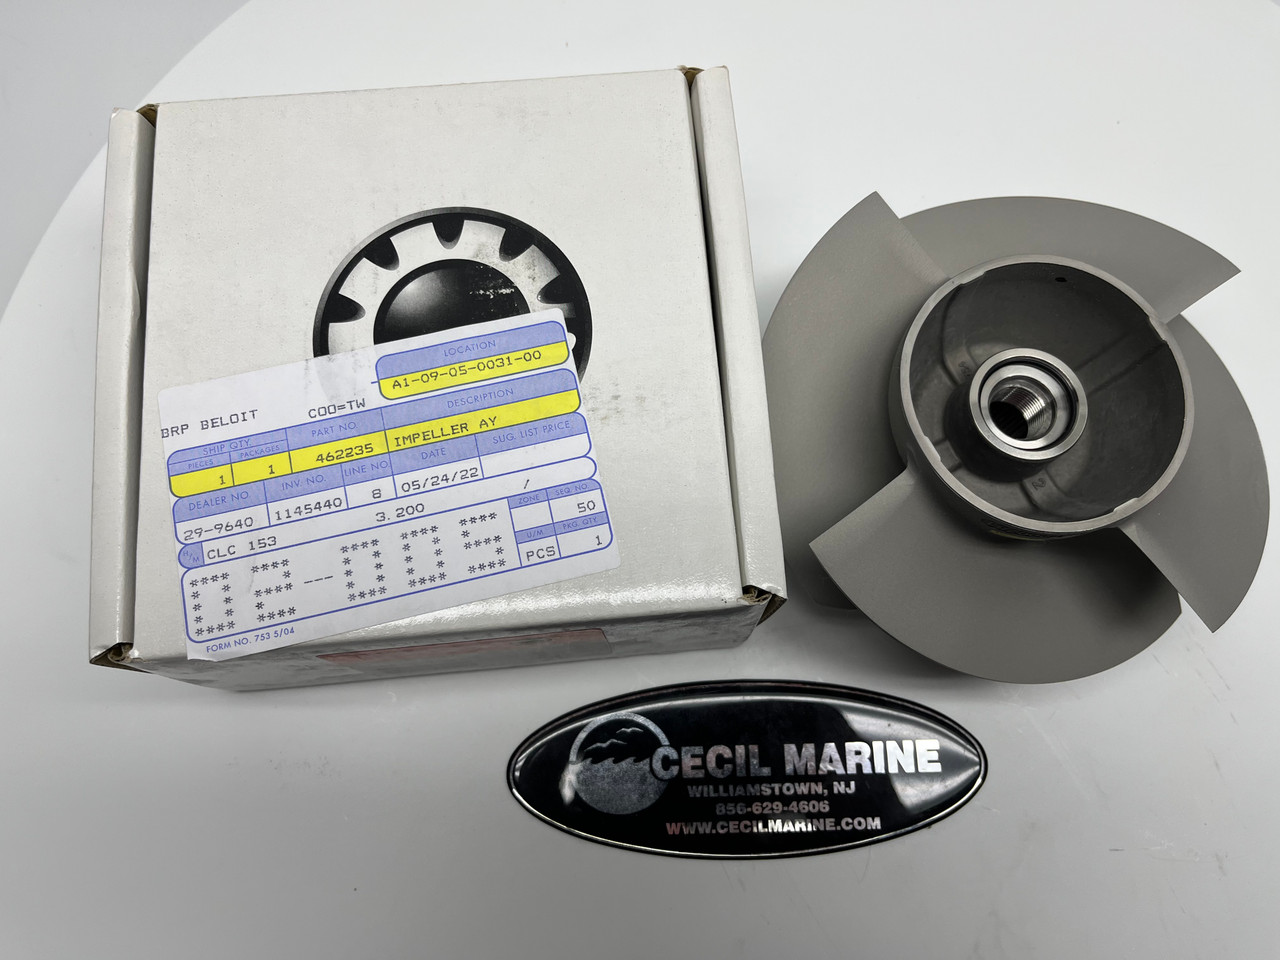 $399.99* GENUINE BRP no tax* STARBOARD IMPELLER 200 HP. 21 TO 23FT. & 24 TO 25 FT. 0462235 (BRP's old part # was 461139) *In Stock & Ready To Ship!